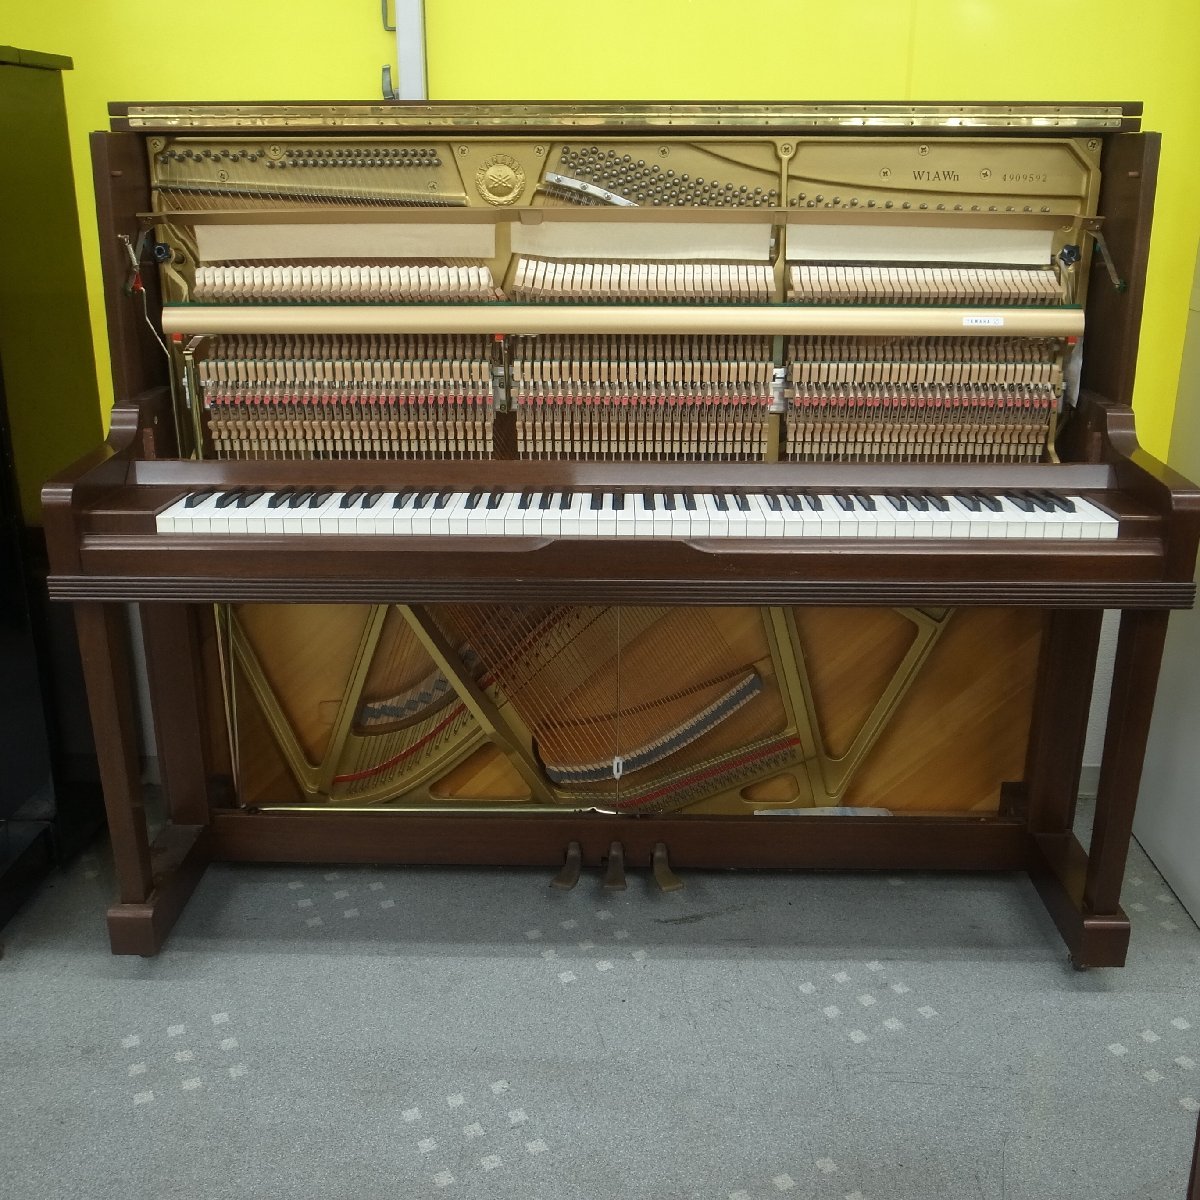 2003T YAMAHA Yamaha upright piano W1AWn 1990 year made in the shop. pick up Aichi prefecture half rice field city 